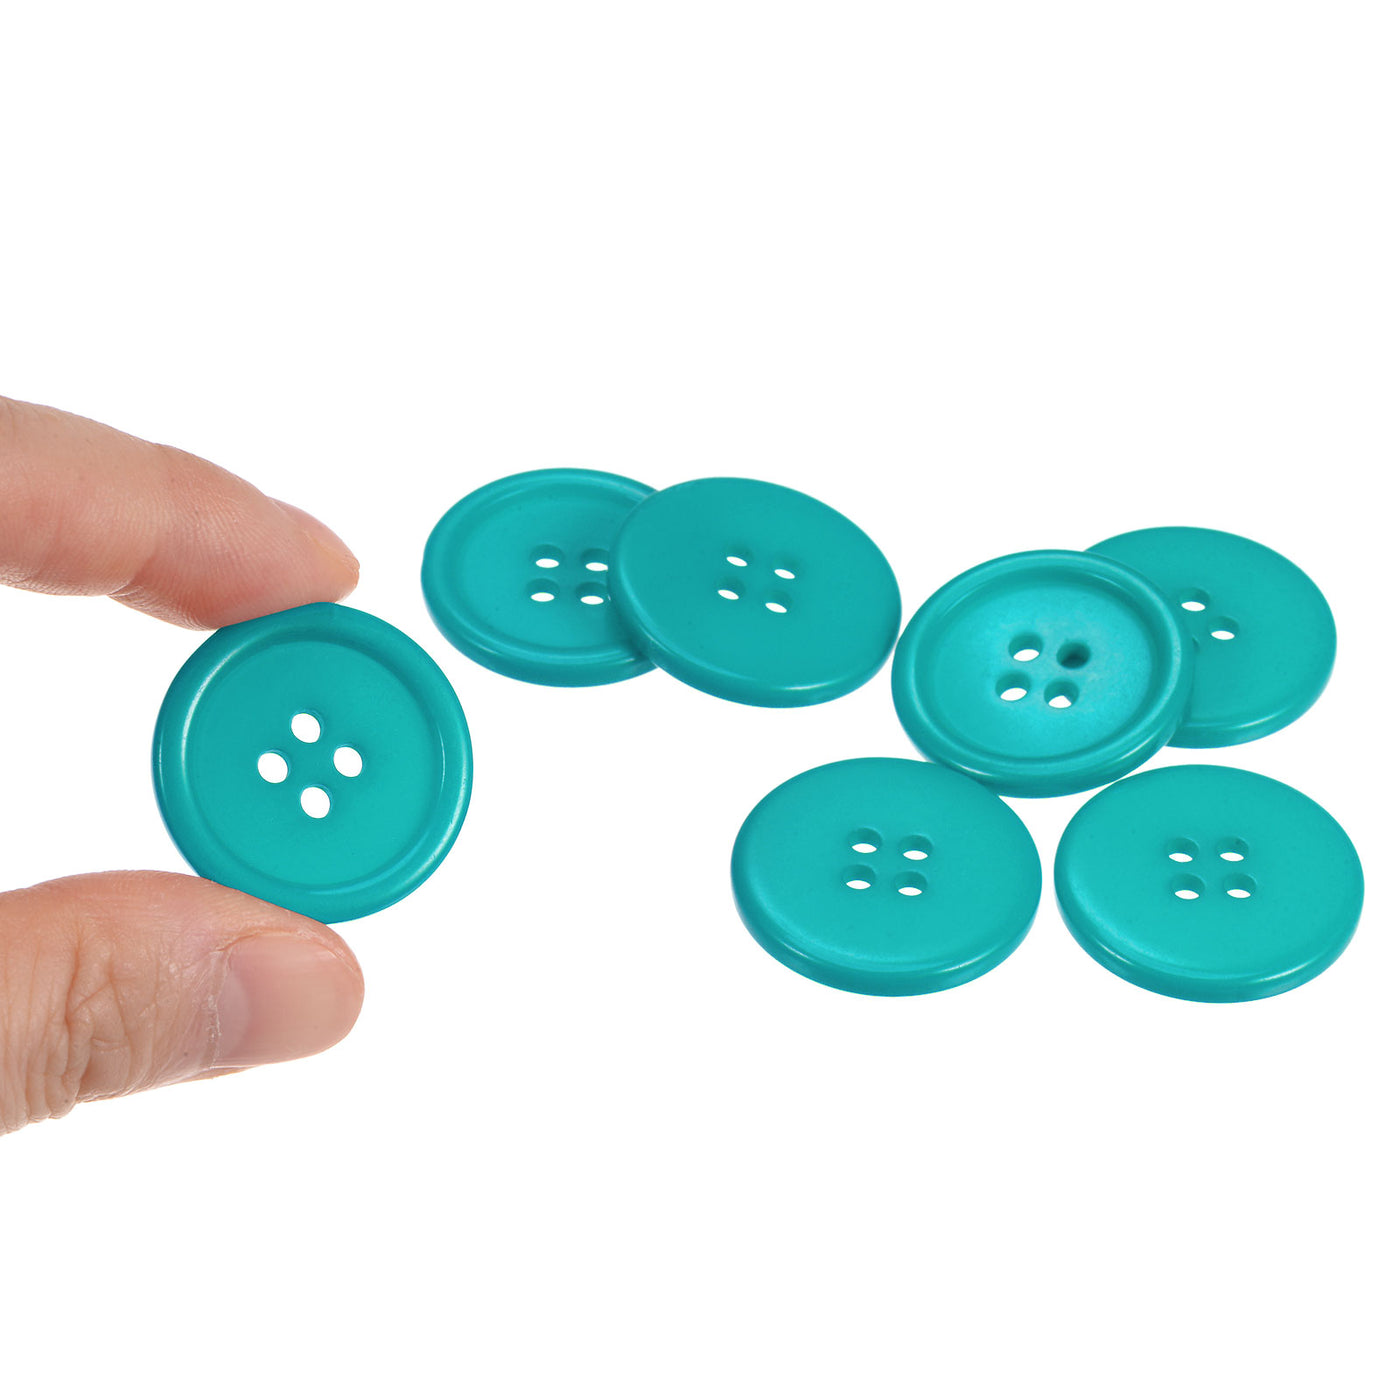 Harfington 60pcs 40L Sewing Buttons 1" Resin Round Flat 4-Hole Craft Buttons, Blue